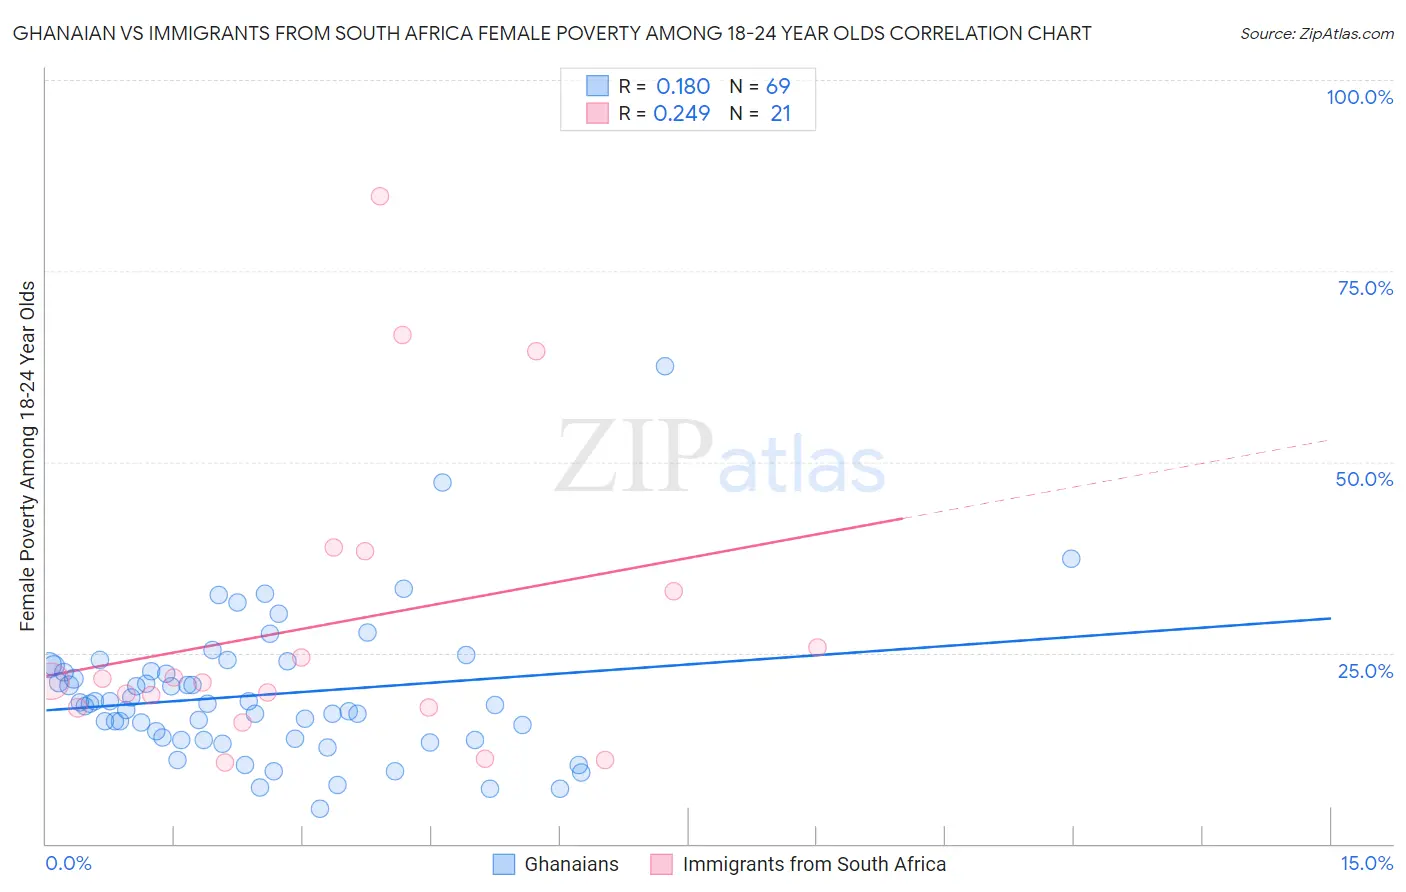 Ghanaian vs Immigrants from South Africa Female Poverty Among 18-24 Year Olds